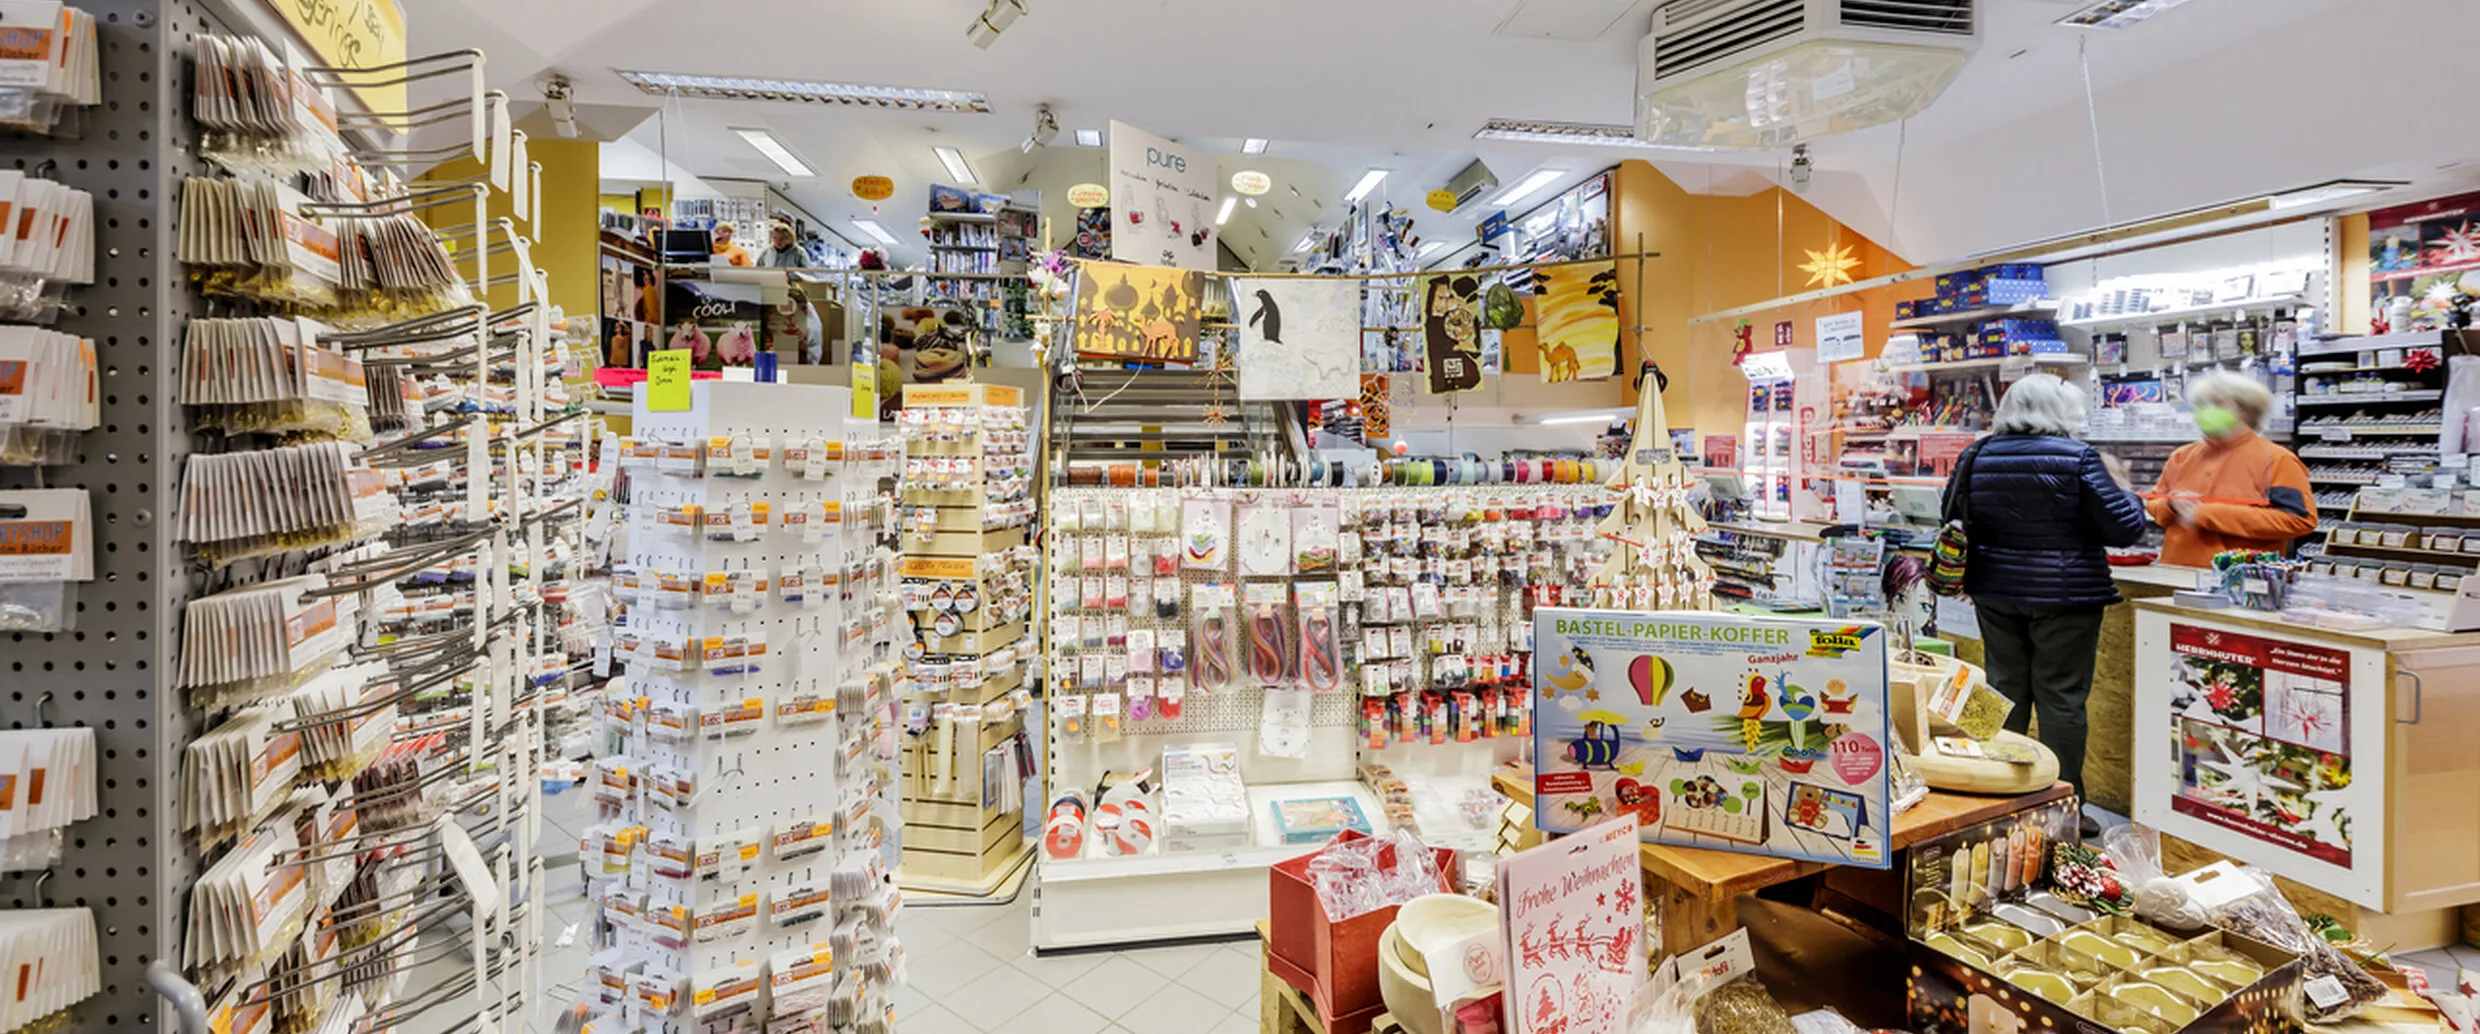 Hobbyshop Ruther in Germany, europe | Handicrafts - Country Helper